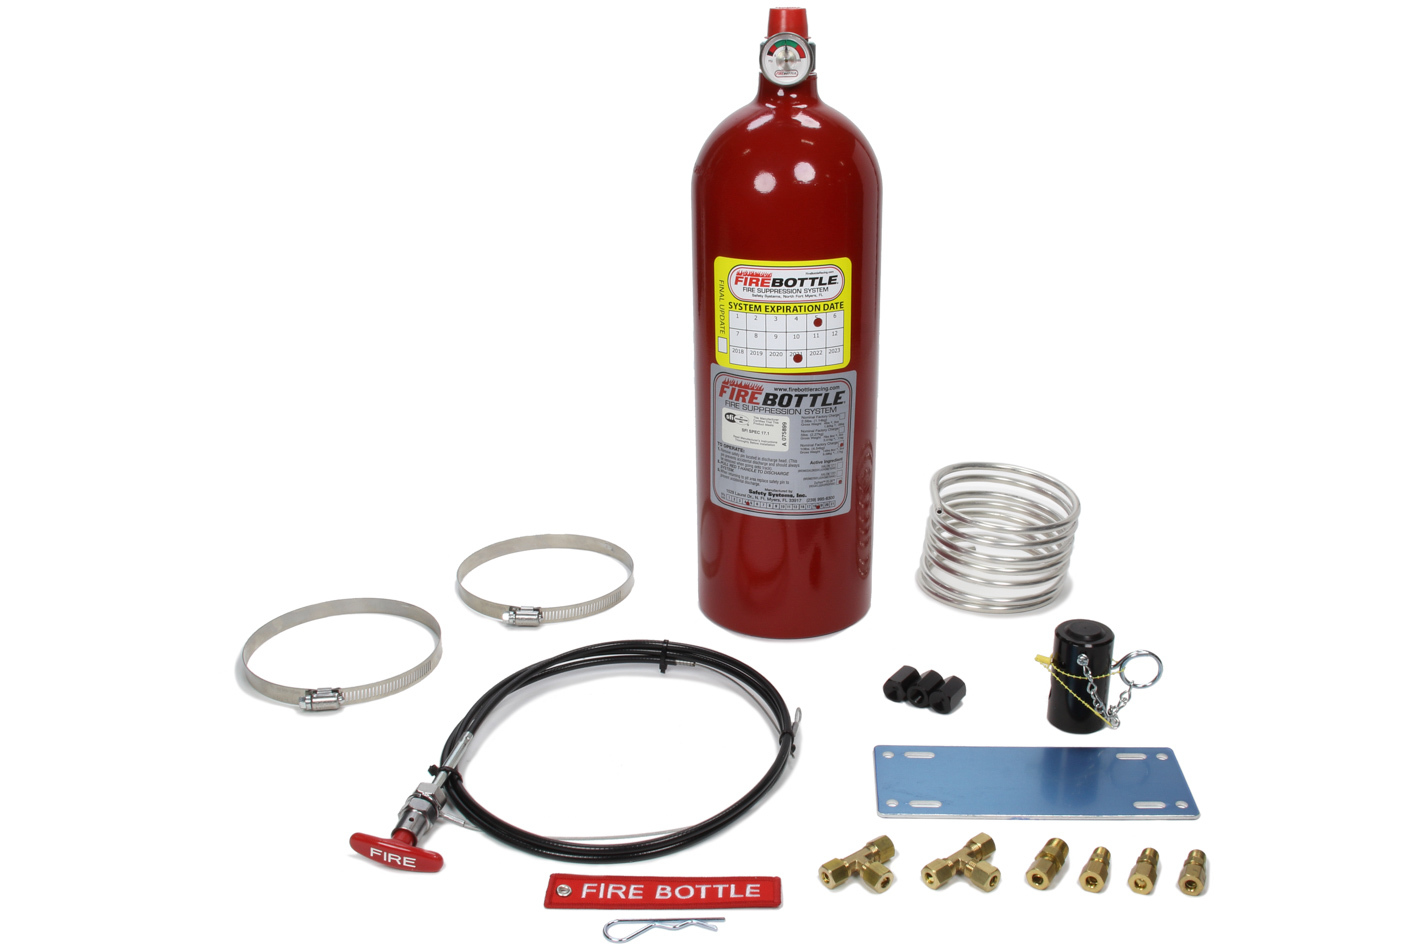 Safety Systems PRC-1000 - Fire Suppression System, RC, Manual, FE-36, SFI Rated, 10.0 lb Bottle, Fittings / Hose / Mount / Pull Cable, Kit